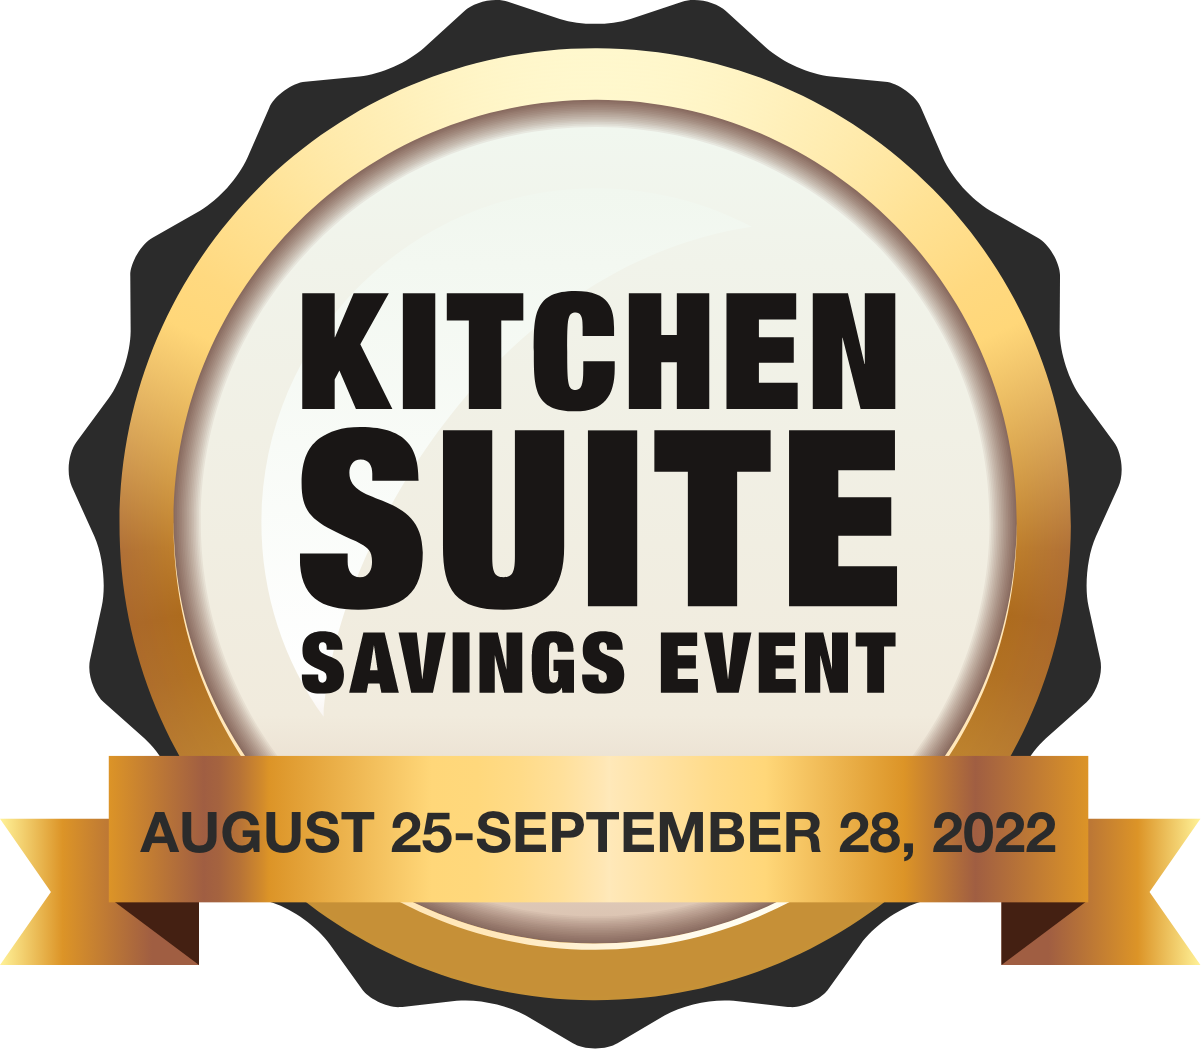 Kitchen Suite Savings Event - August 25-September 28, 2022